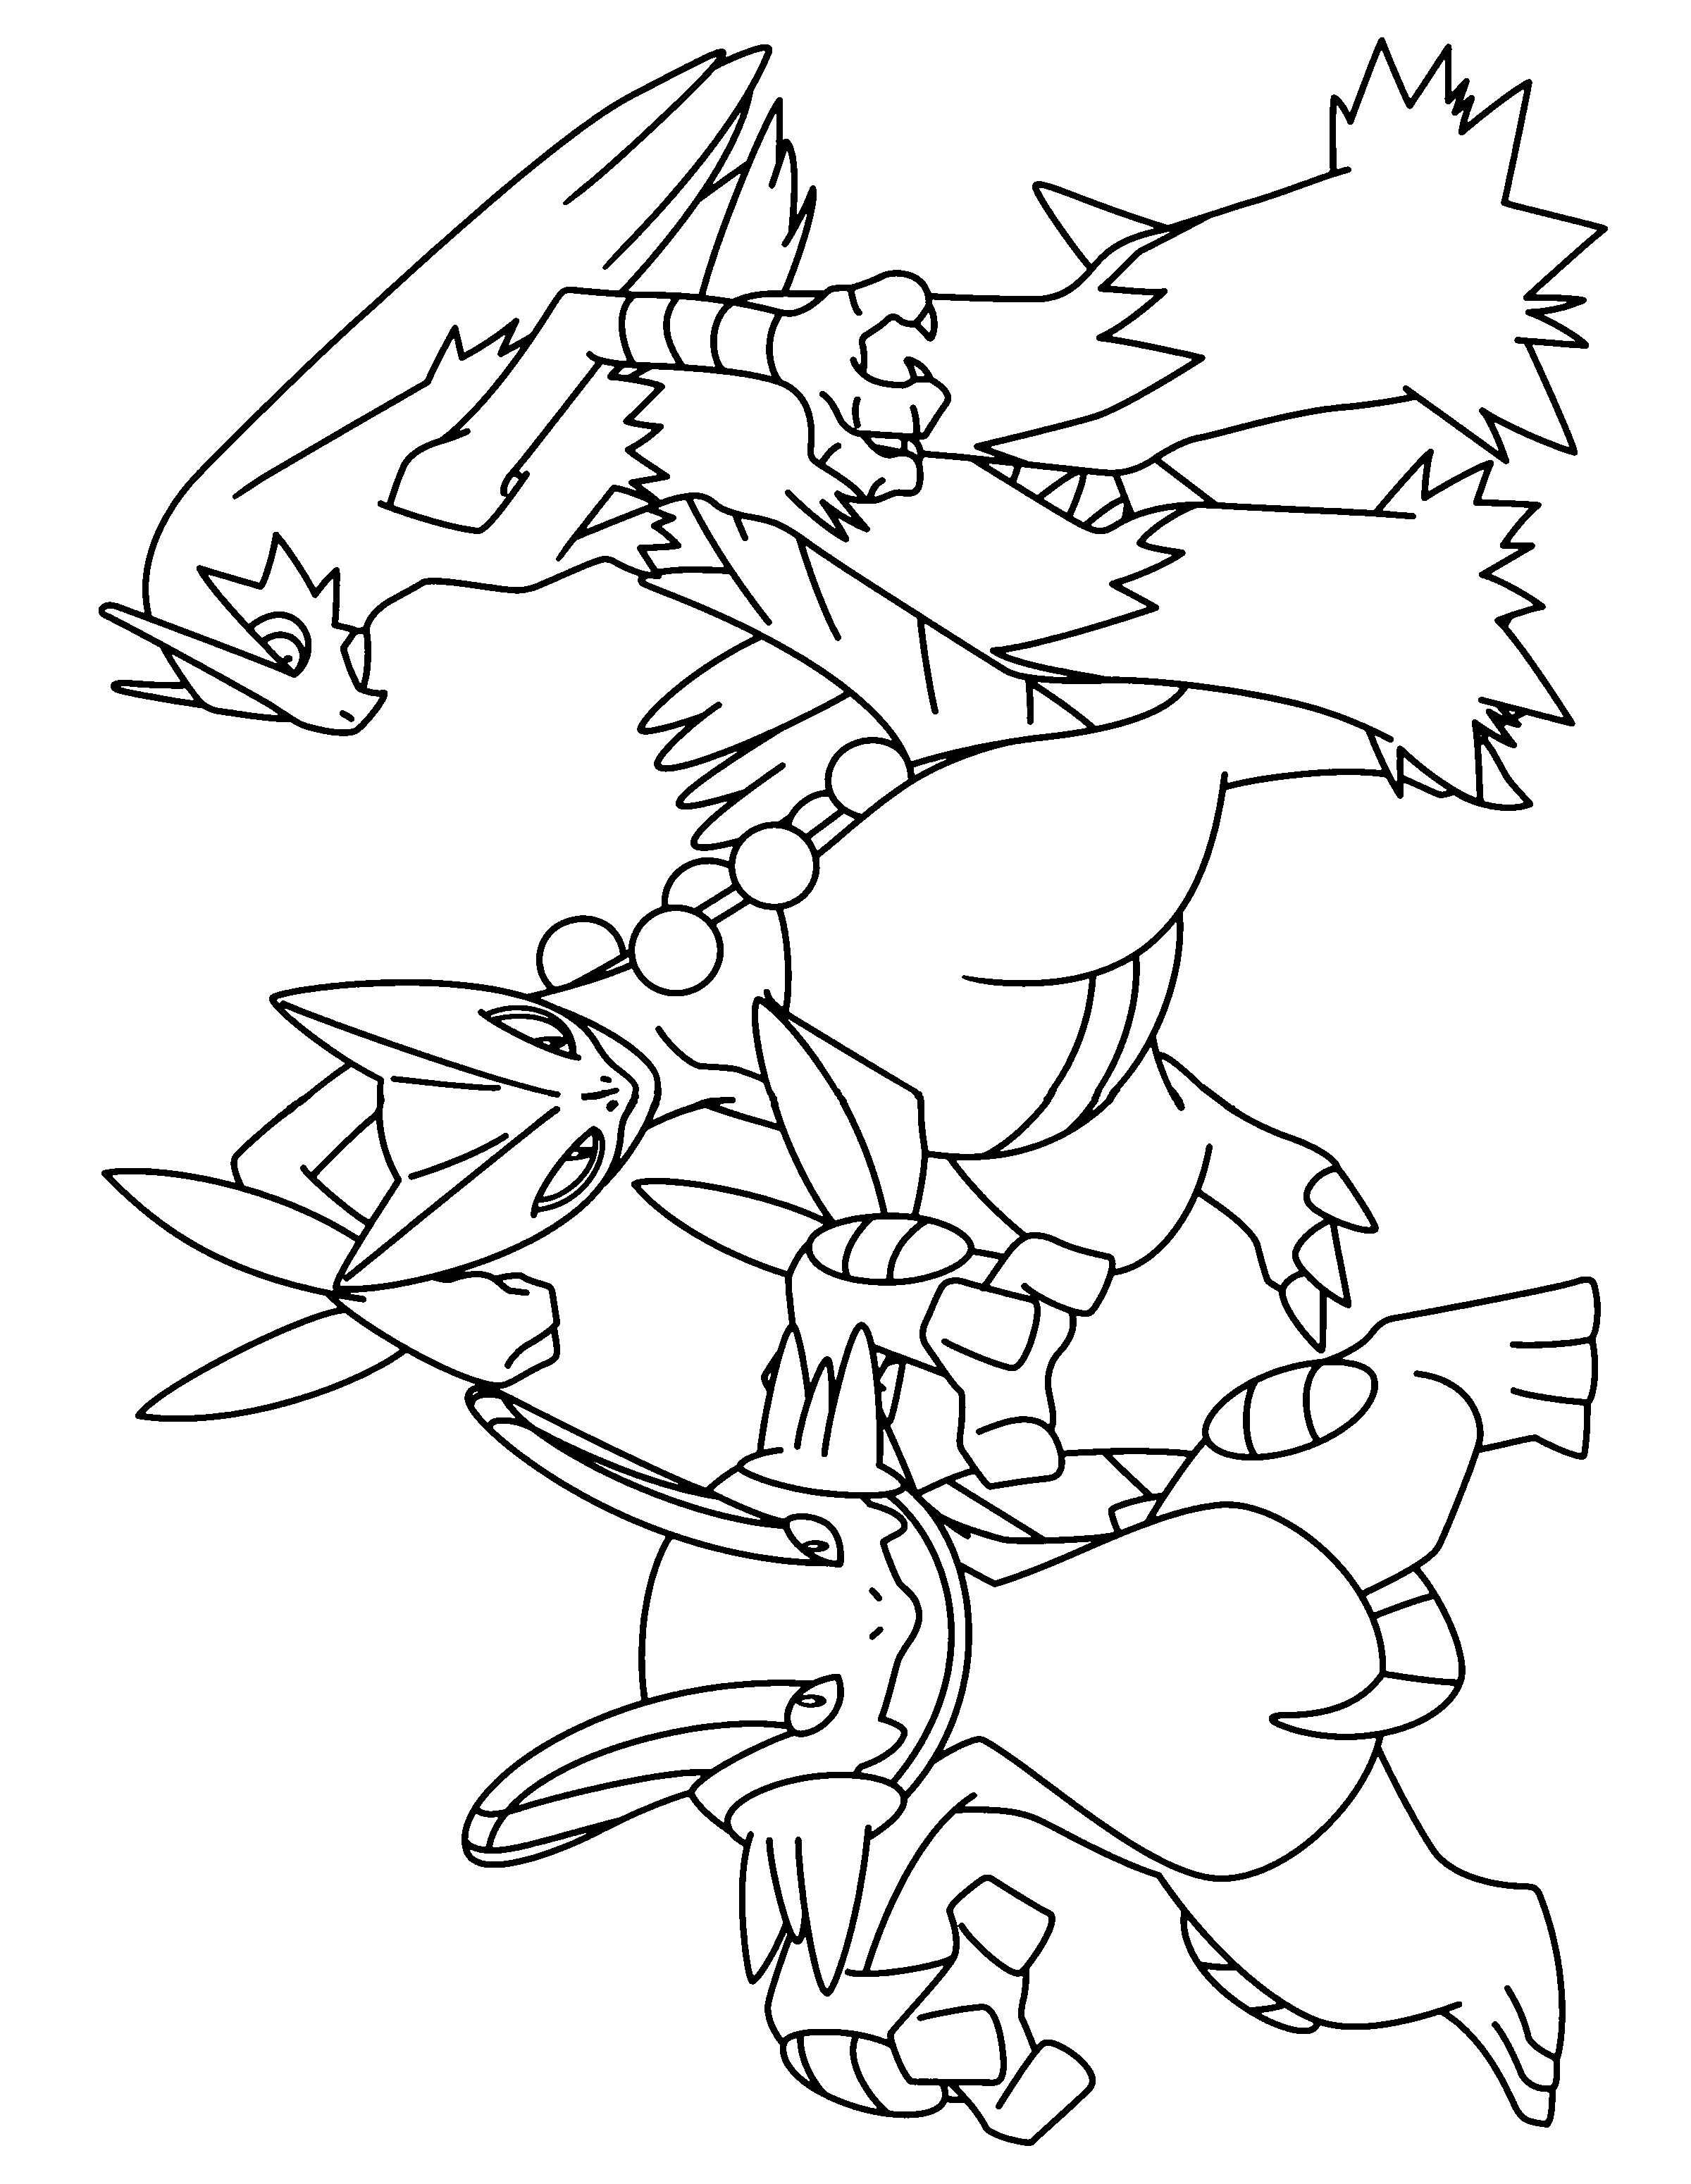 pokemon colouring pages online free pokemon coloring pages join your favorite pokemon on an free online pokemon colouring pages 